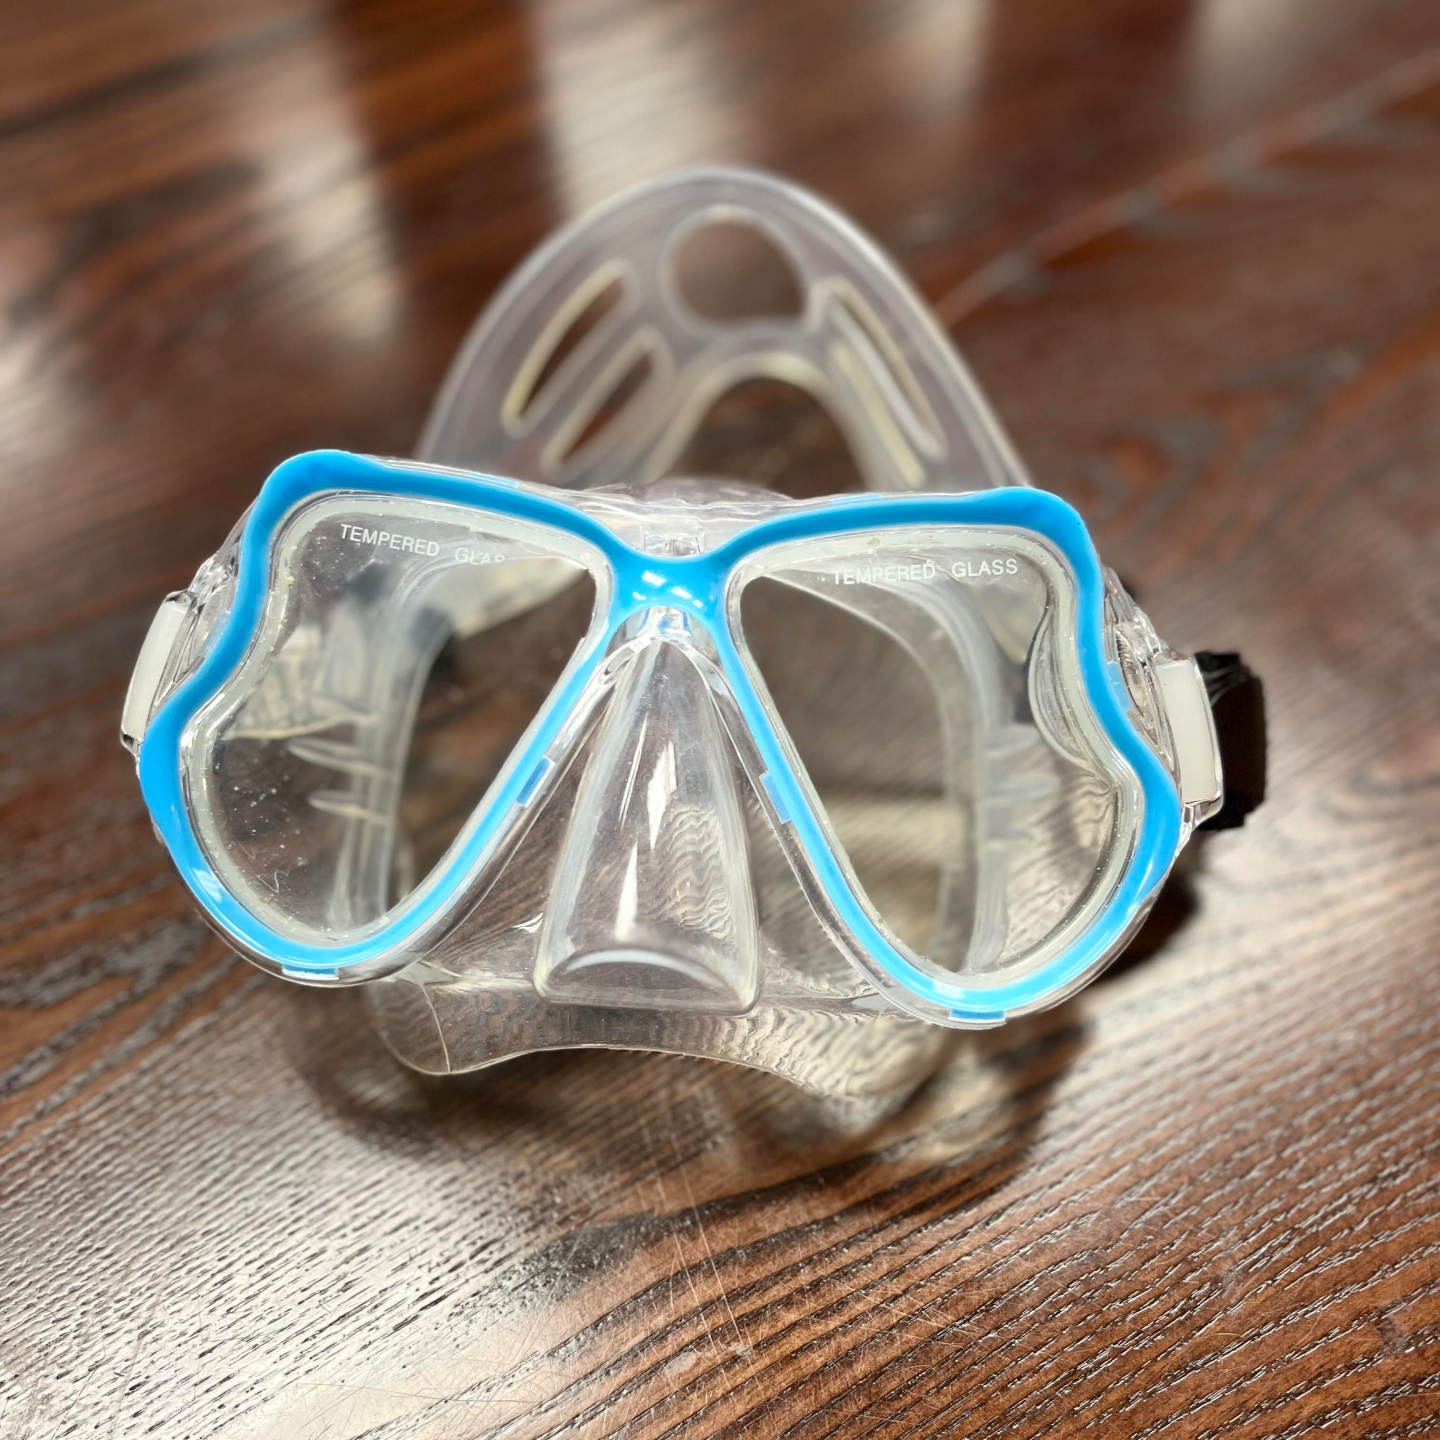 Photo of blue snorkeling googles on a wooden tabletop surface.